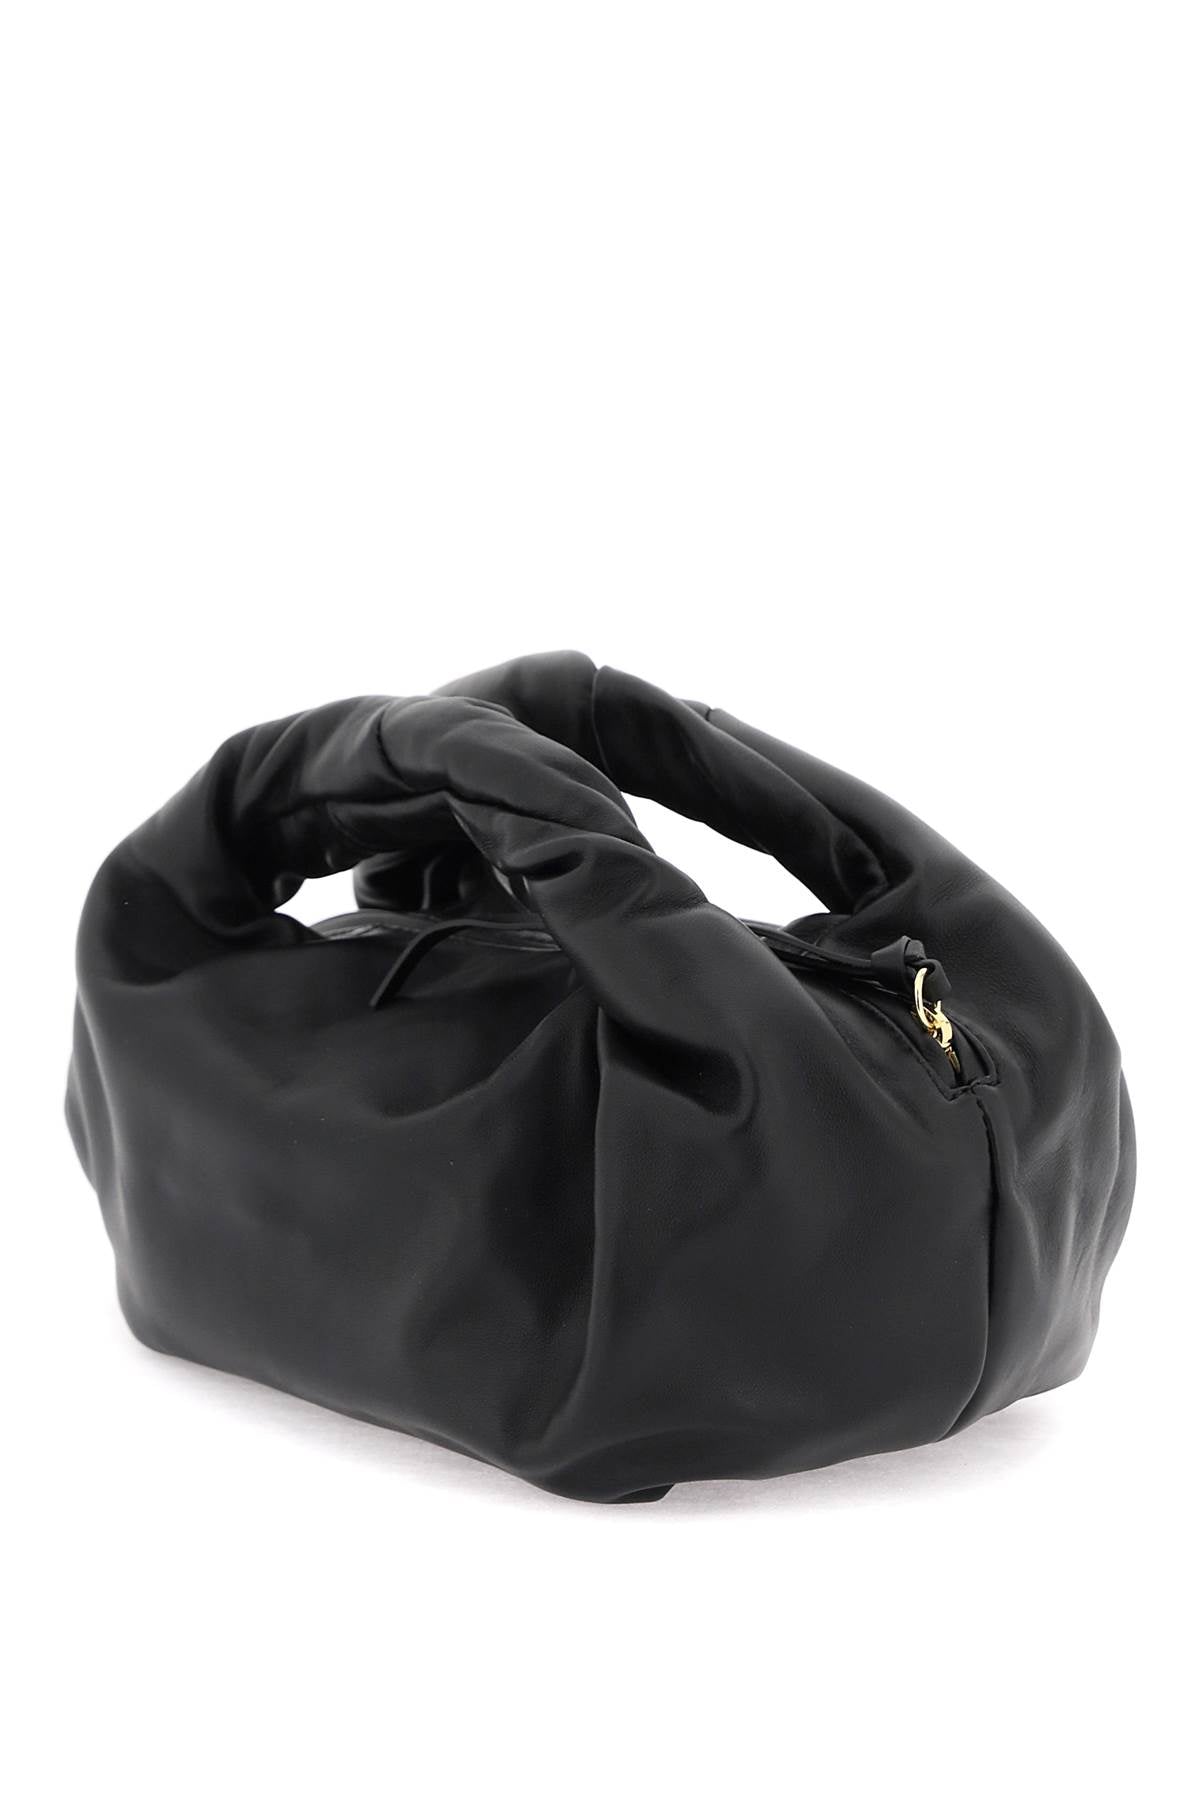 Dries Van Noten slouchy leather handbag with a BW241TWIST822125900